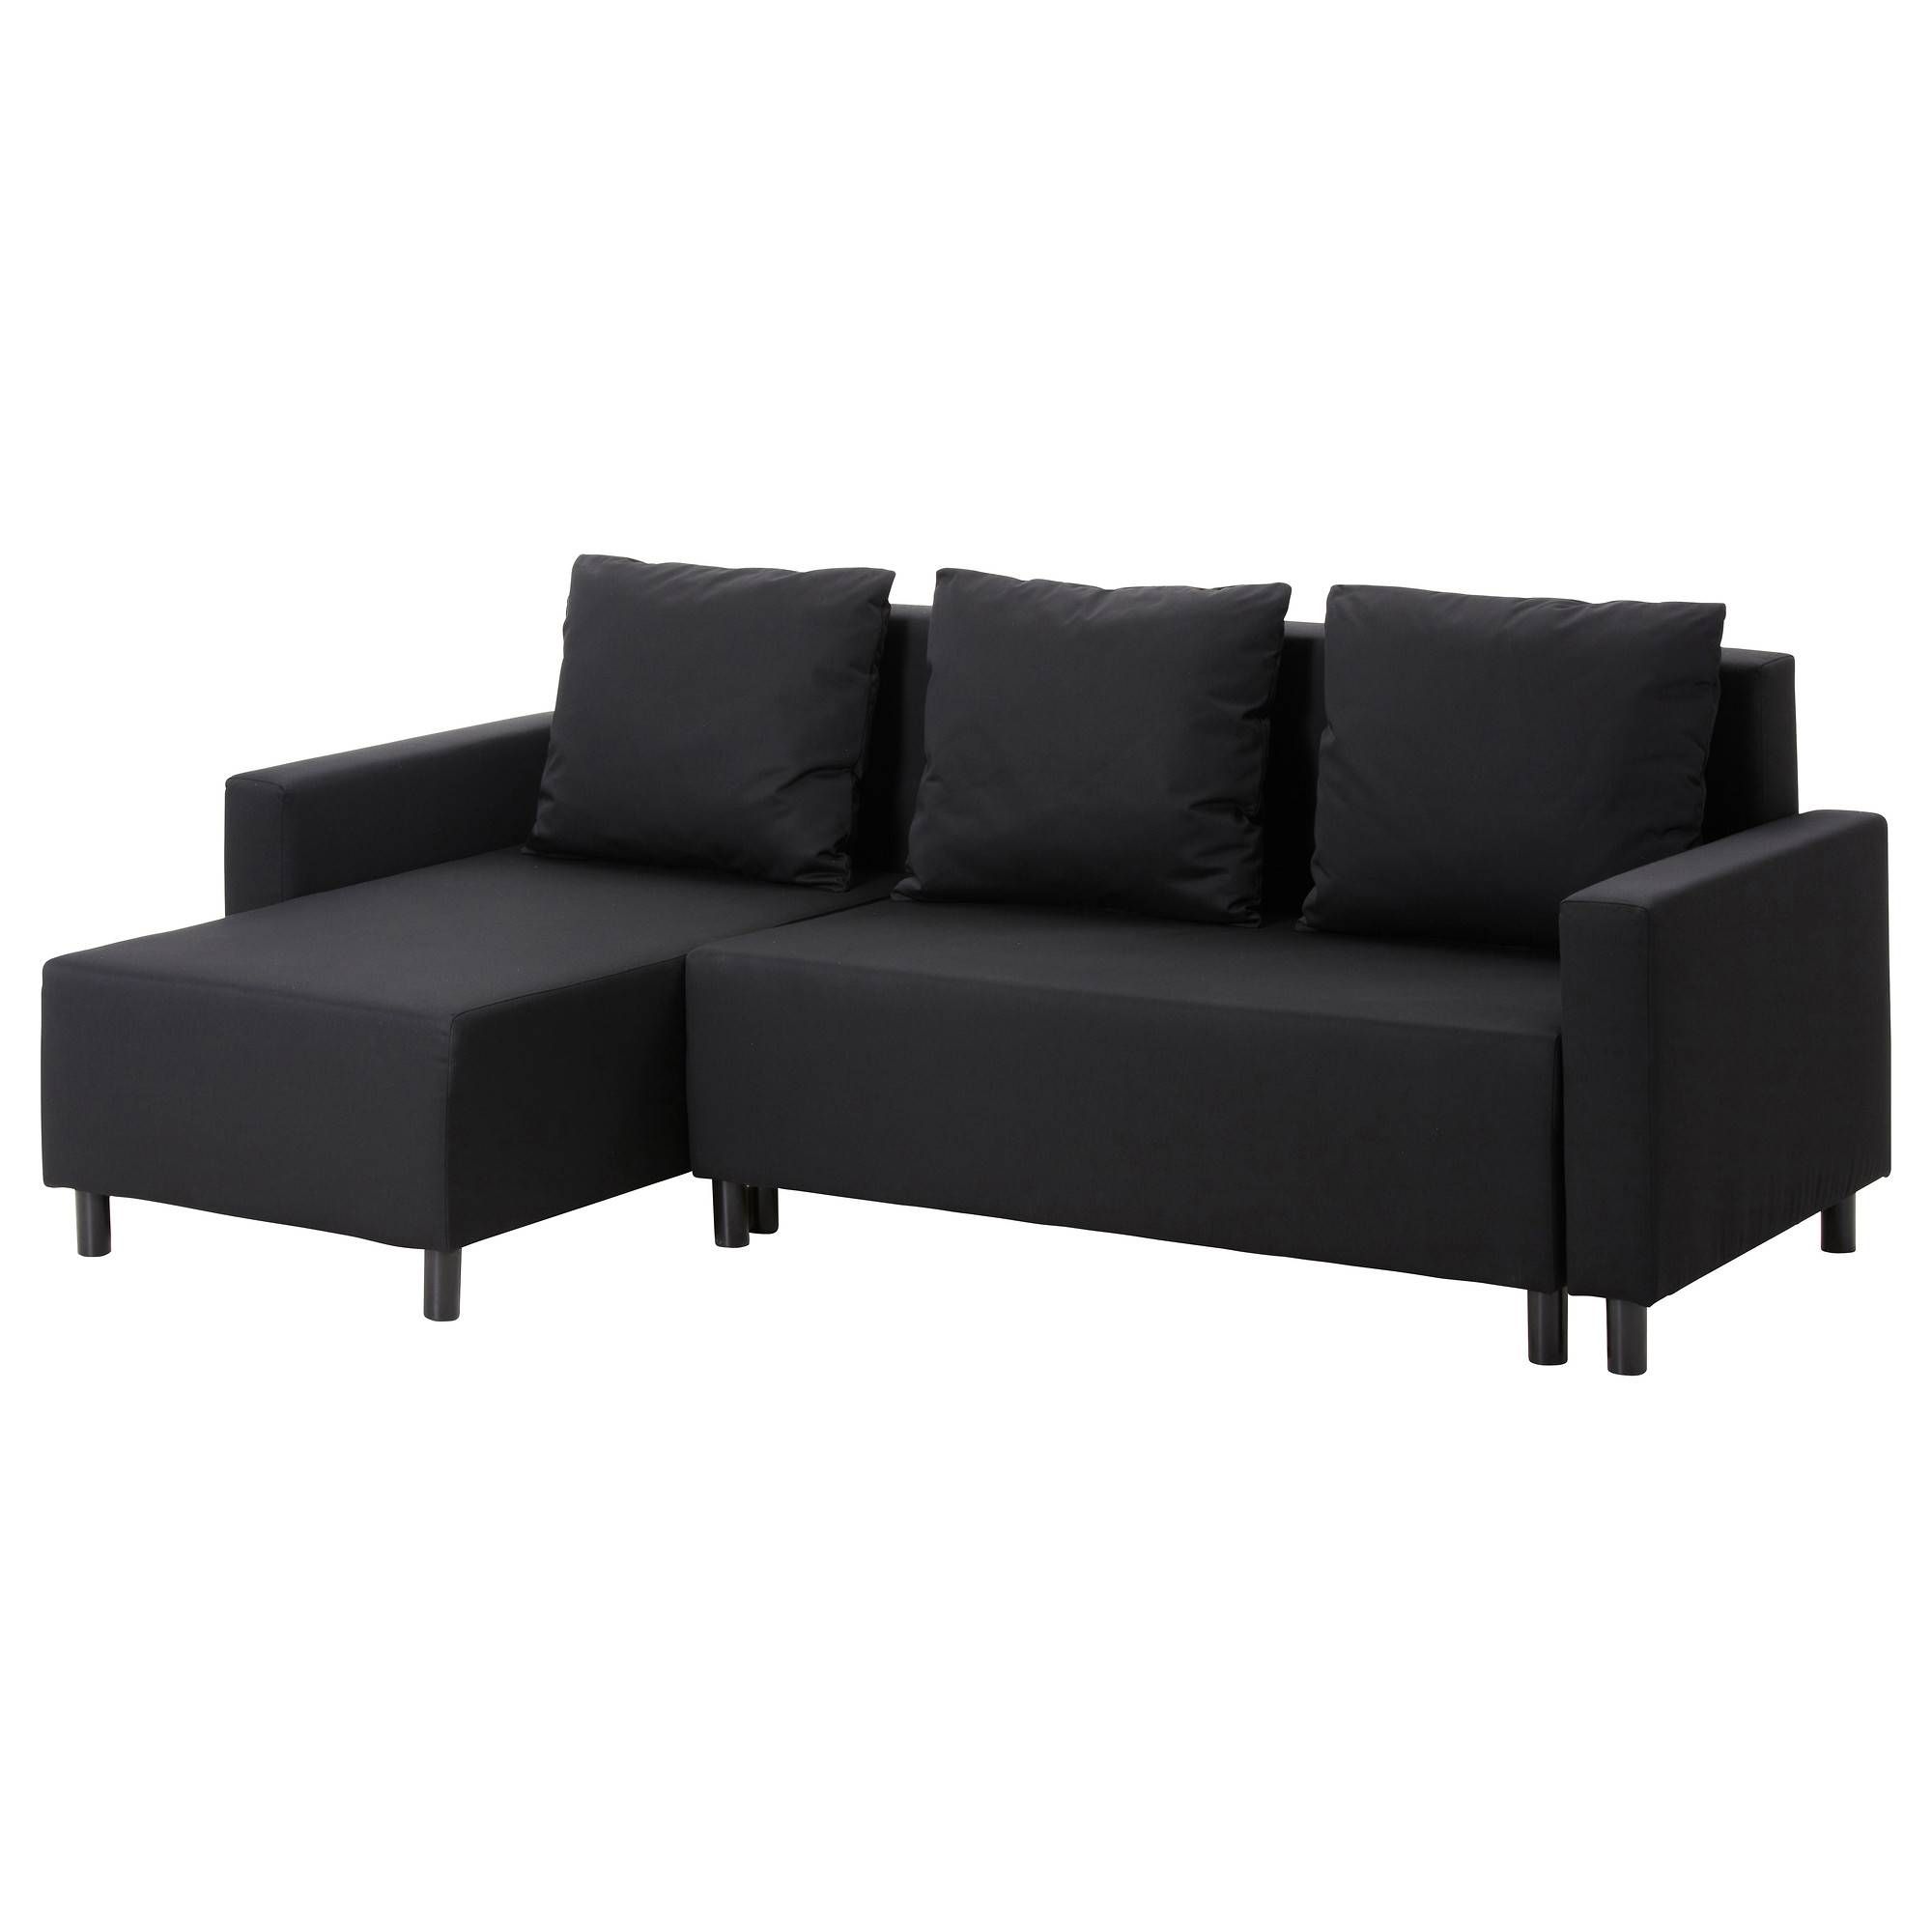 Sofa Beds & Futons – Ikea With Sectional Sofa Beds (View 9 of 30)